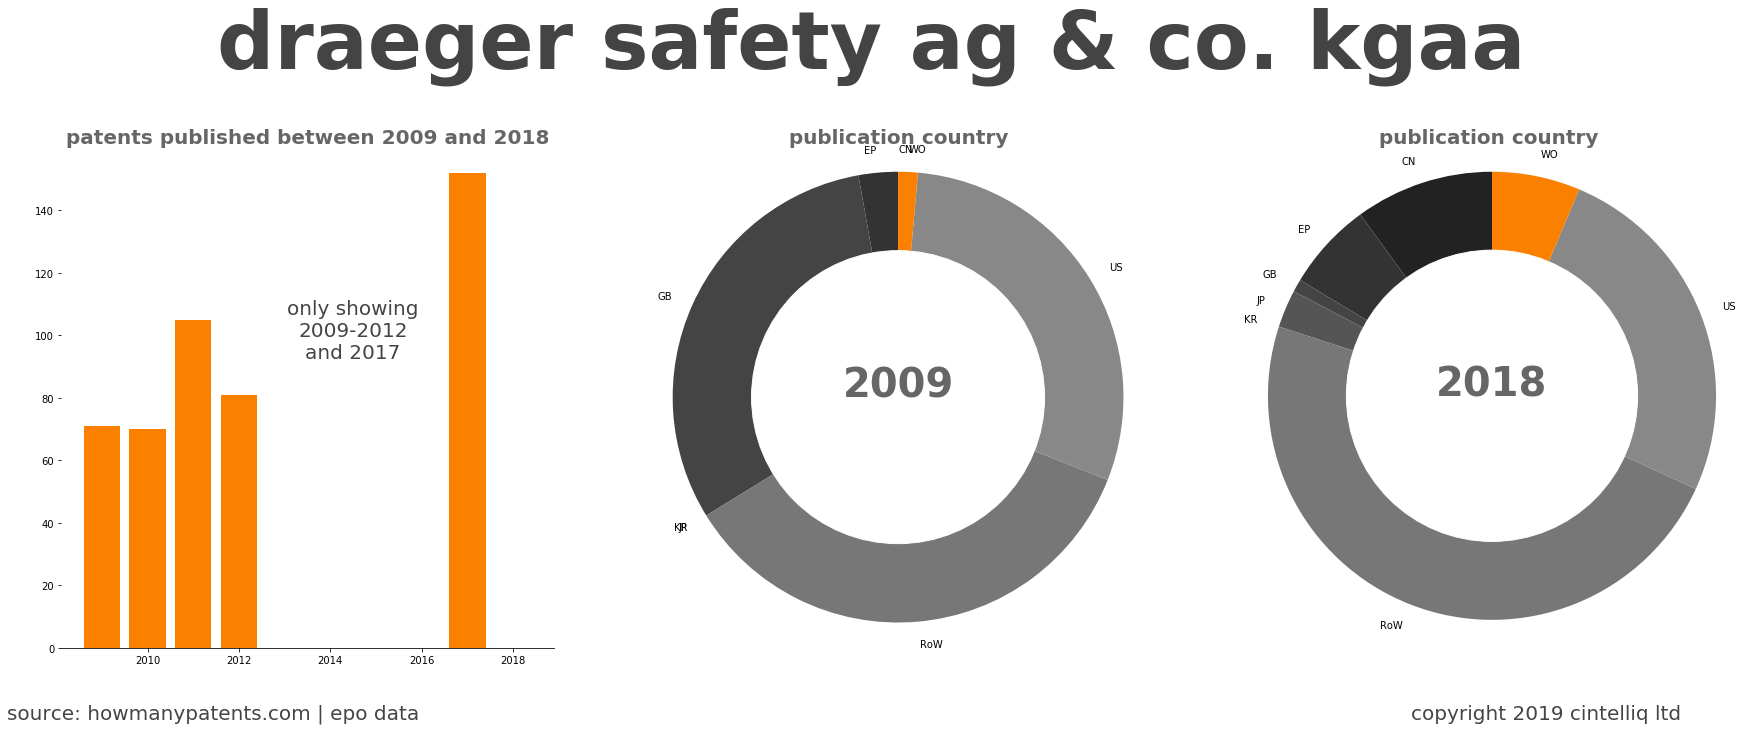 summary of patents for Draeger Safety Ag & Co. Kgaa